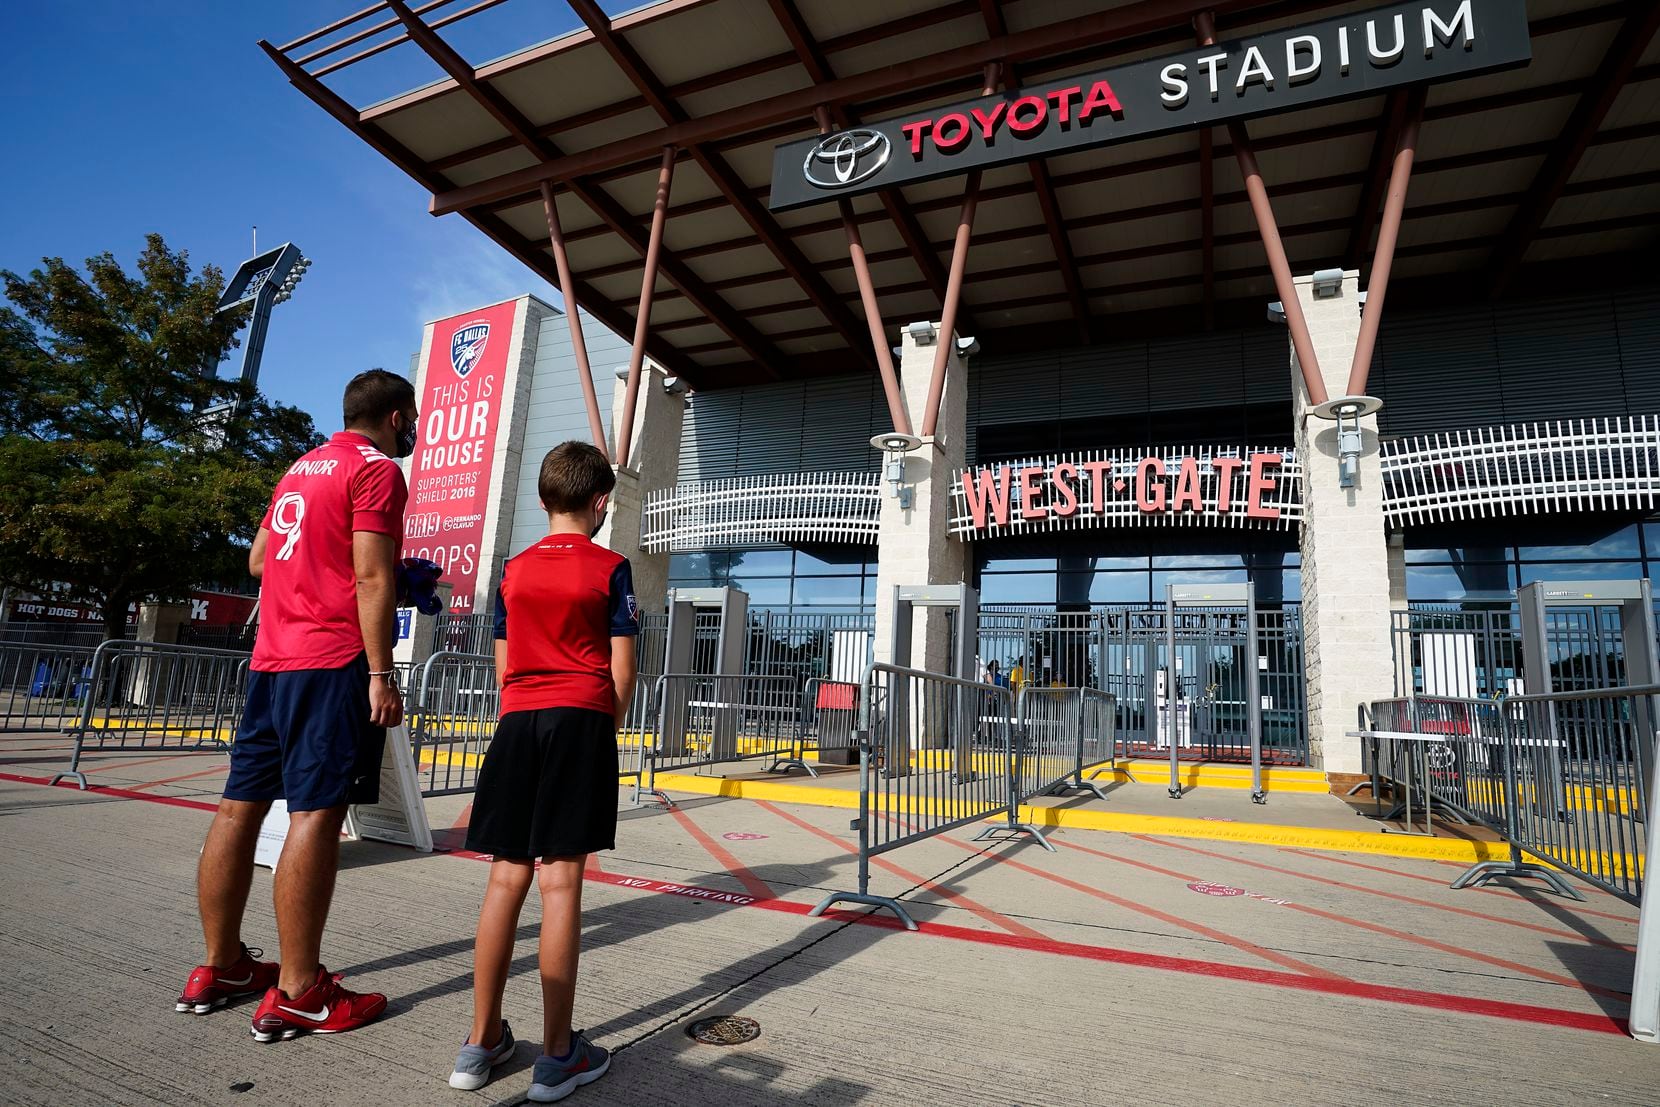 Jeff Files and his son Bentley. 9, are the first in line to enter the West Gate before an MLS soccer game at Toyota Stadium on Wednesday, Aug. 12, 2020, in Frisco, Texas. (Smiley N. Pool/The Dallas Morning News)